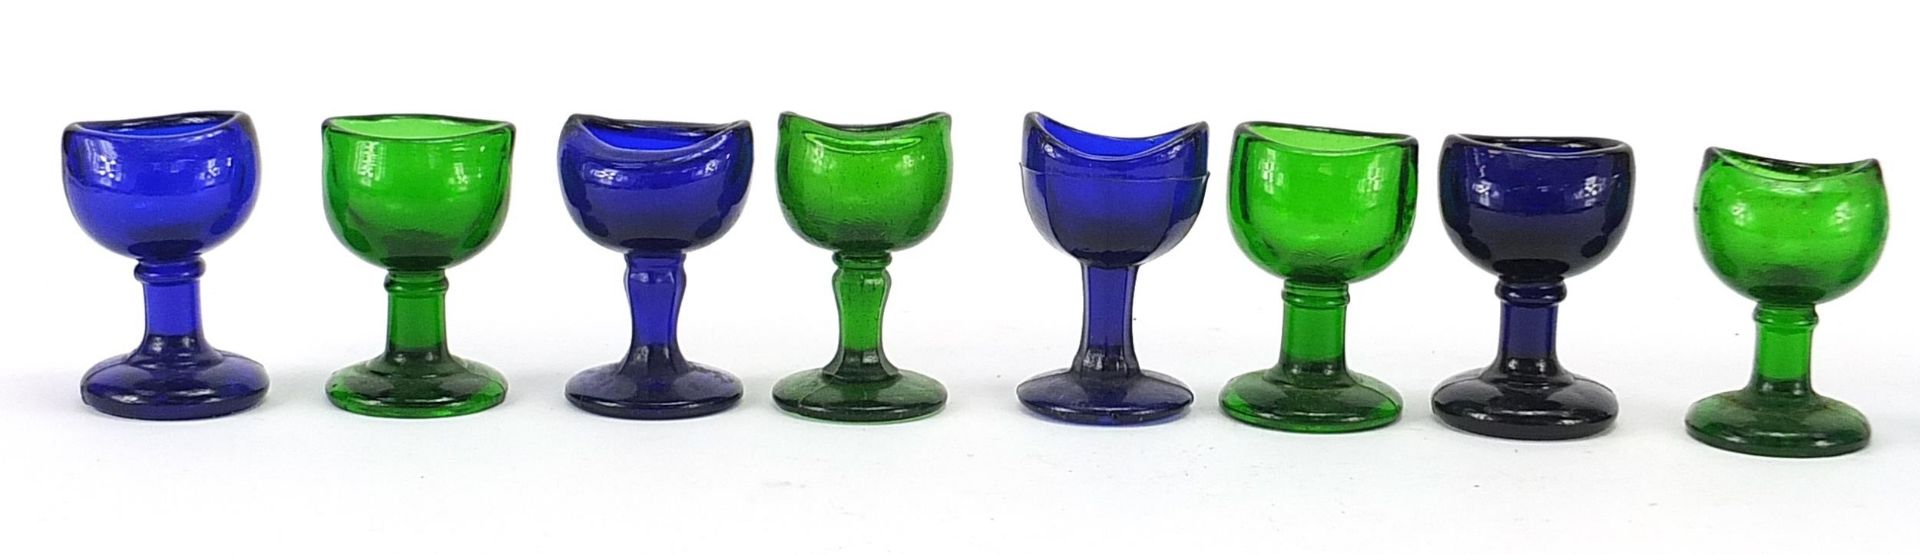 Eleven antique glass eye baths including six Bristol blue examples, each approximately 7.5cm high - Image 2 of 3